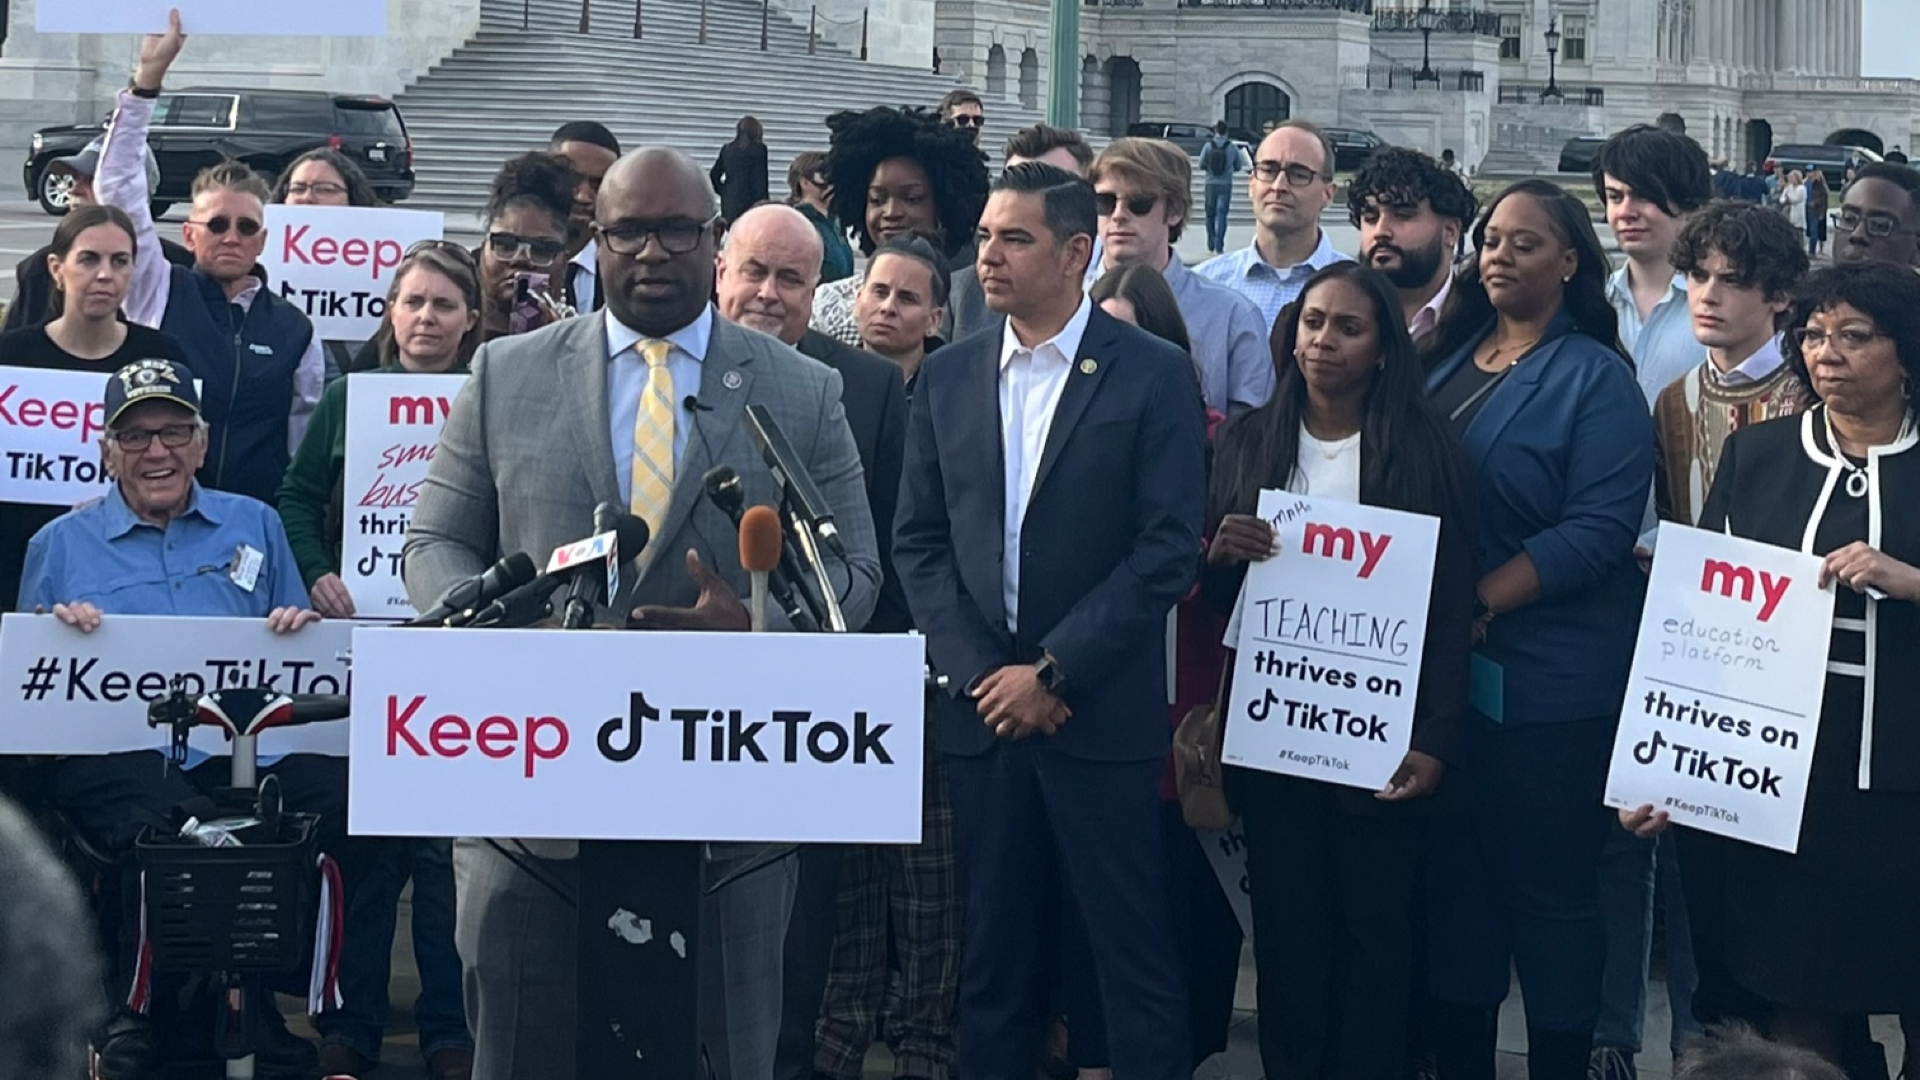 Protests have erupted at the Capitol building in Washington DC against the possibility of a TikTok ban